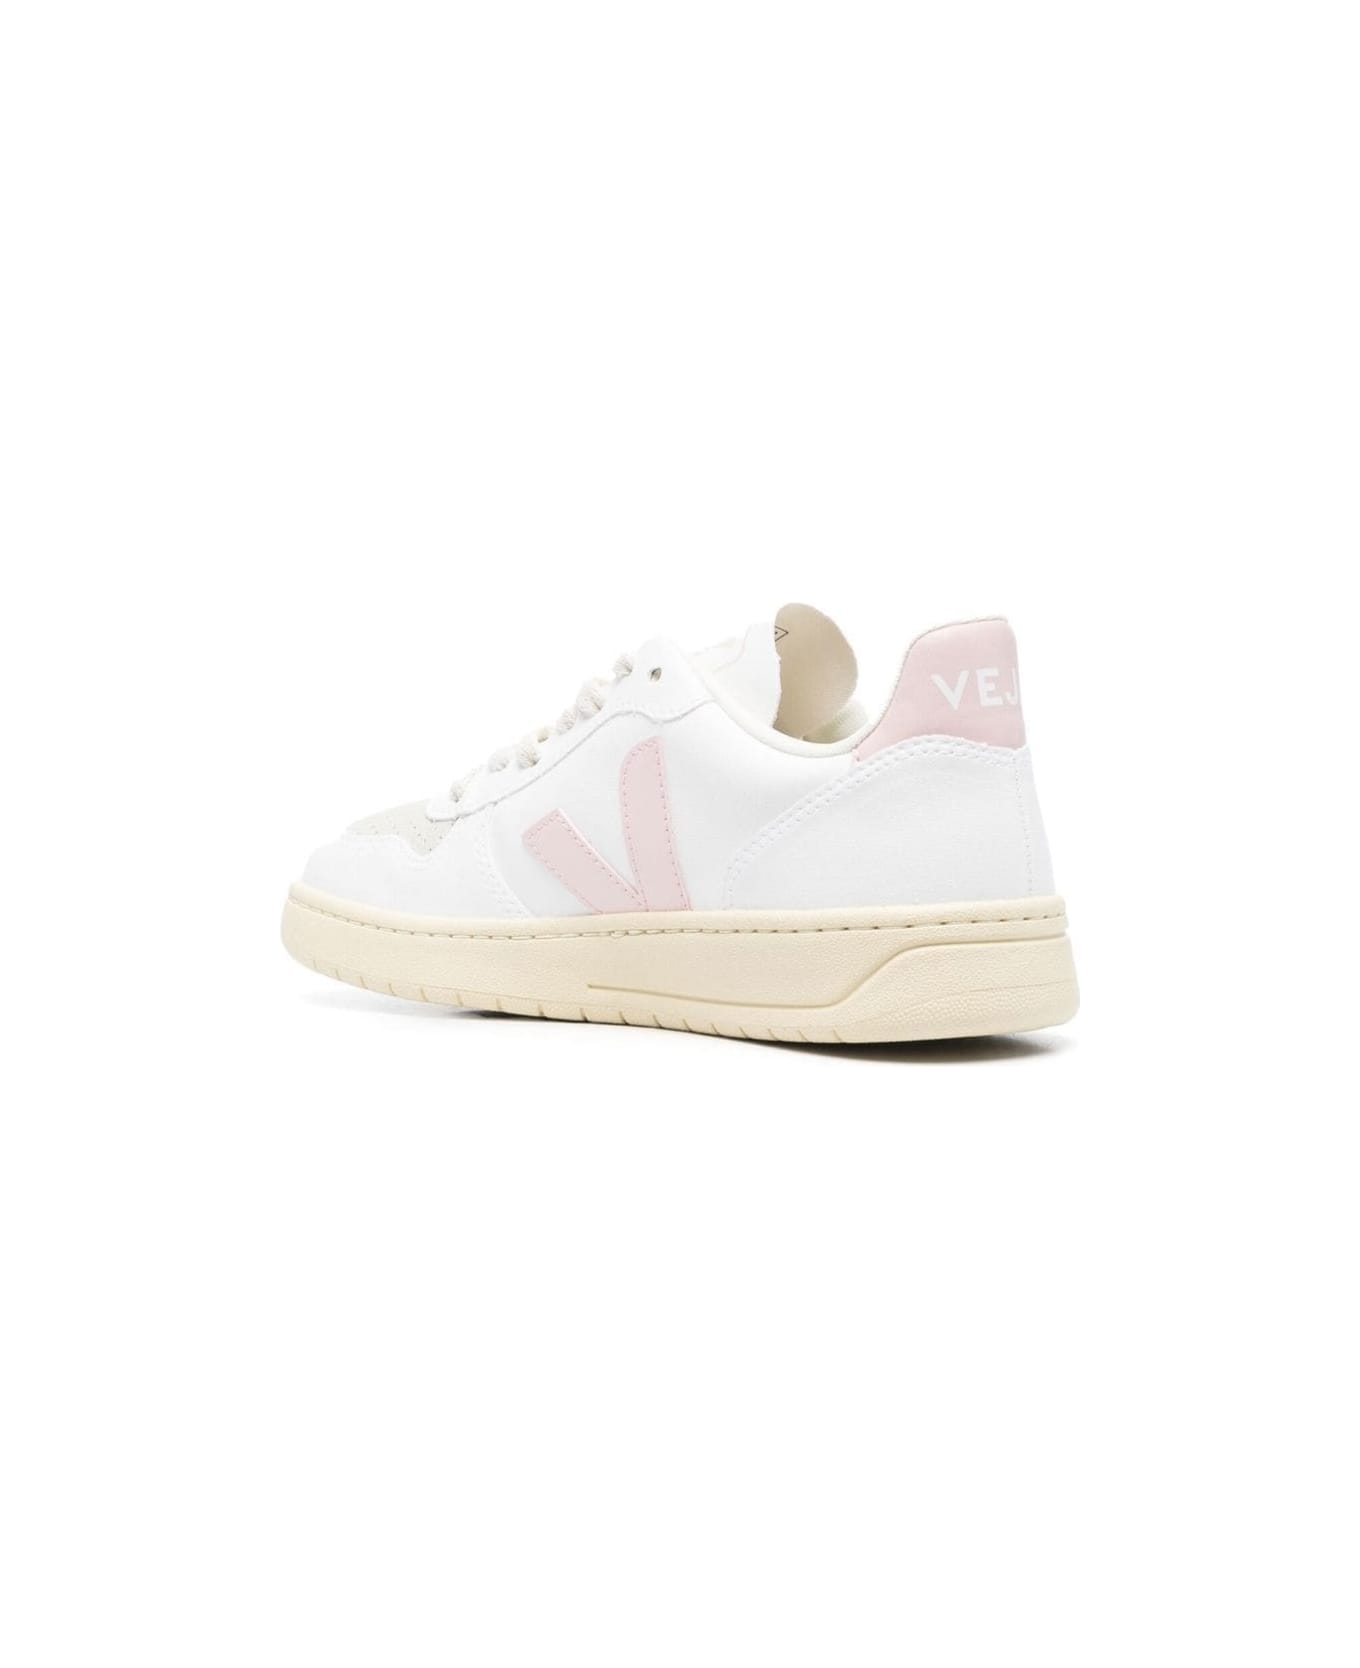 Veja Sneakers V-10 With Logo In White And Pink Leather Woman - White